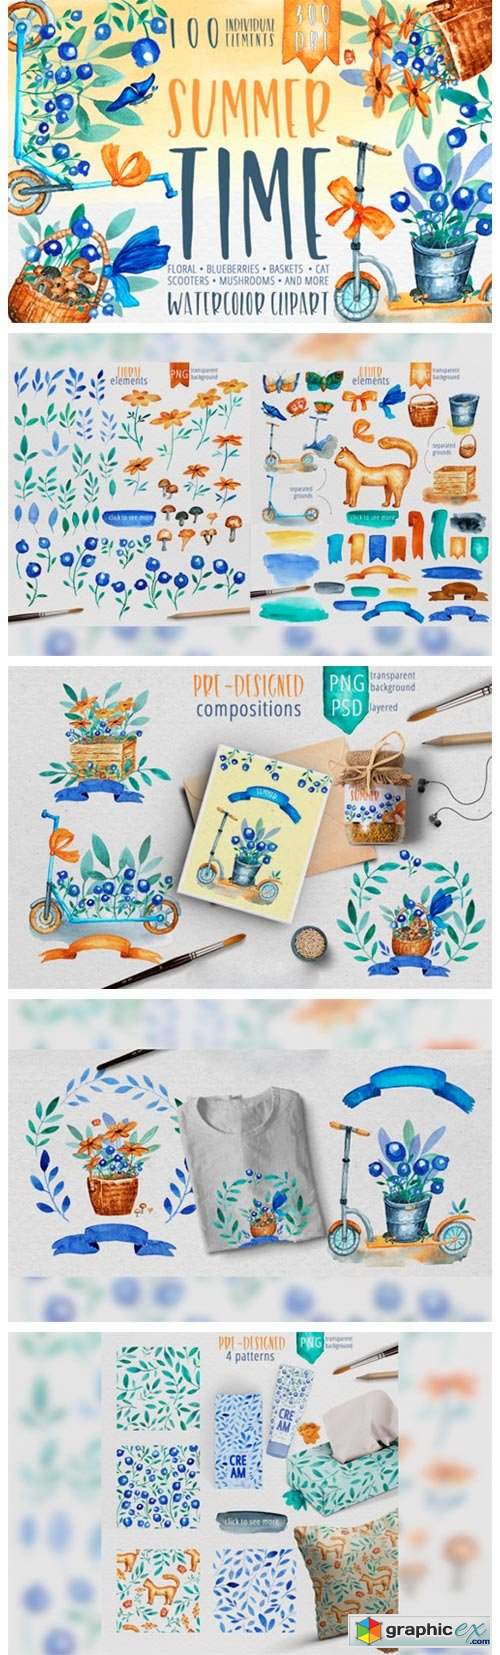  Summer Time - Watercolor Clipart 